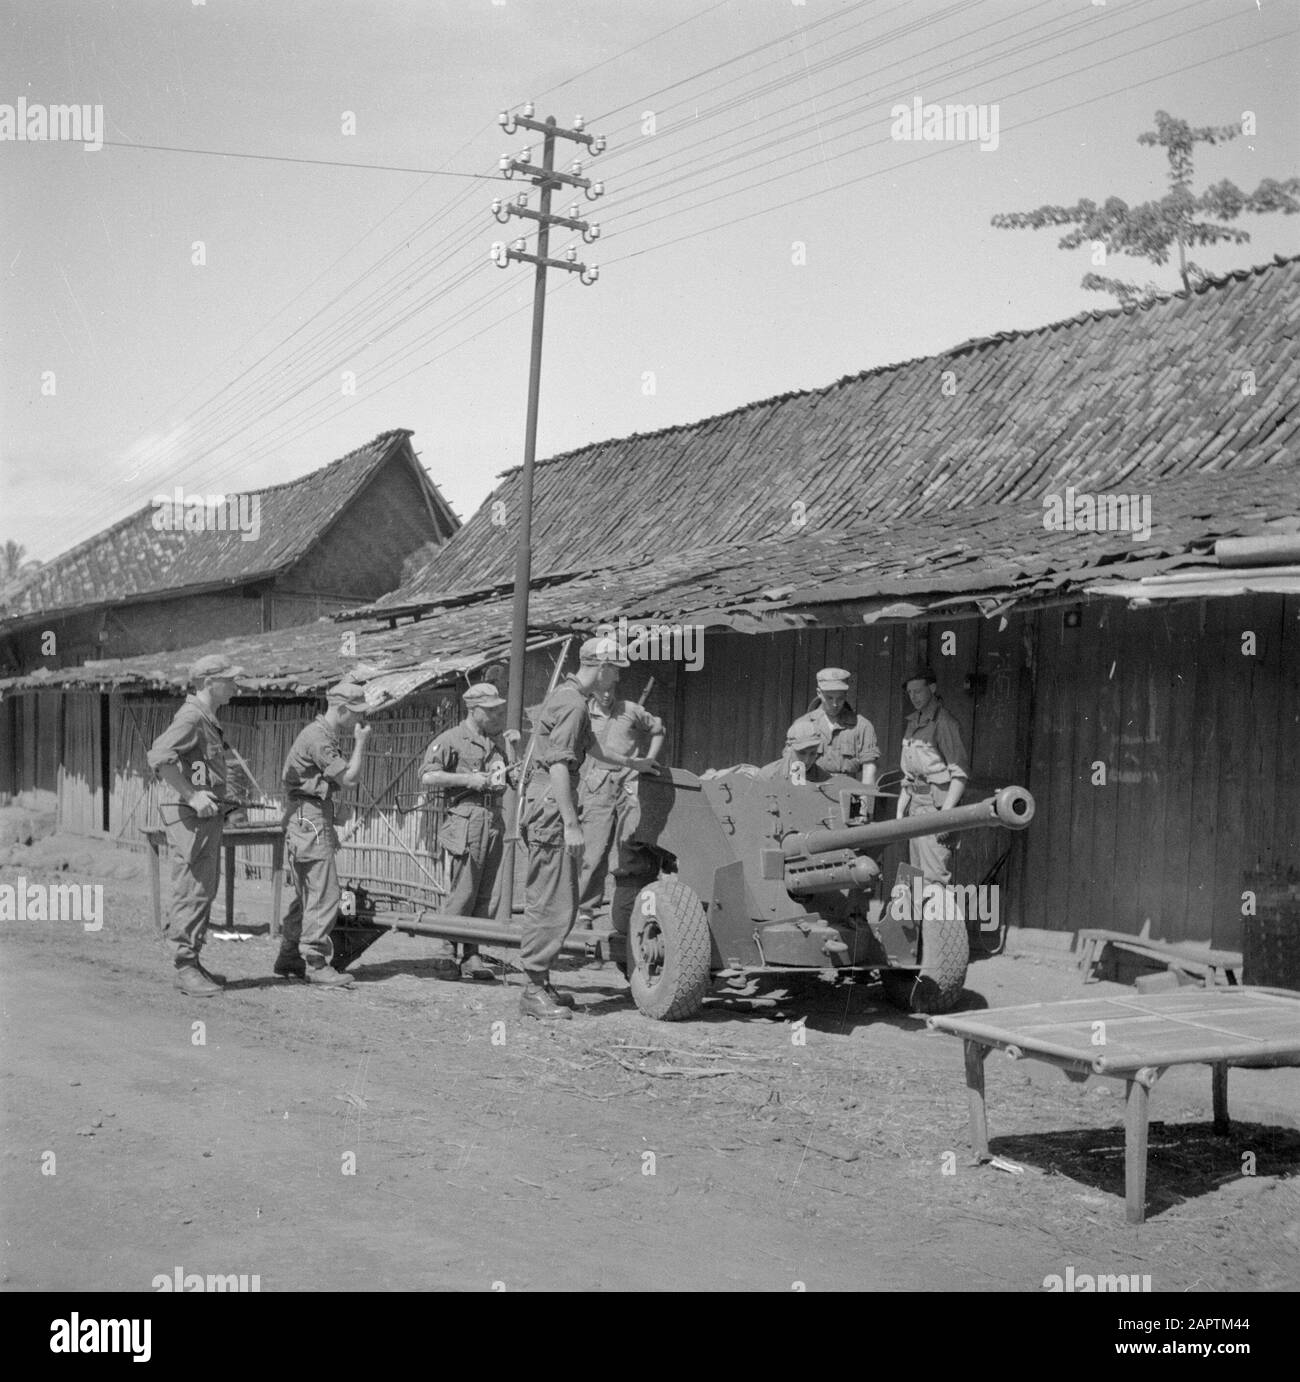 War volunteers in Malacca and Indonesia  Placing light artillery in a kampong Date: March 1946 Location: Indonesia, Indonesia, Java, Dutch East Indies Keywords: artillery, villages, military Stock Photo